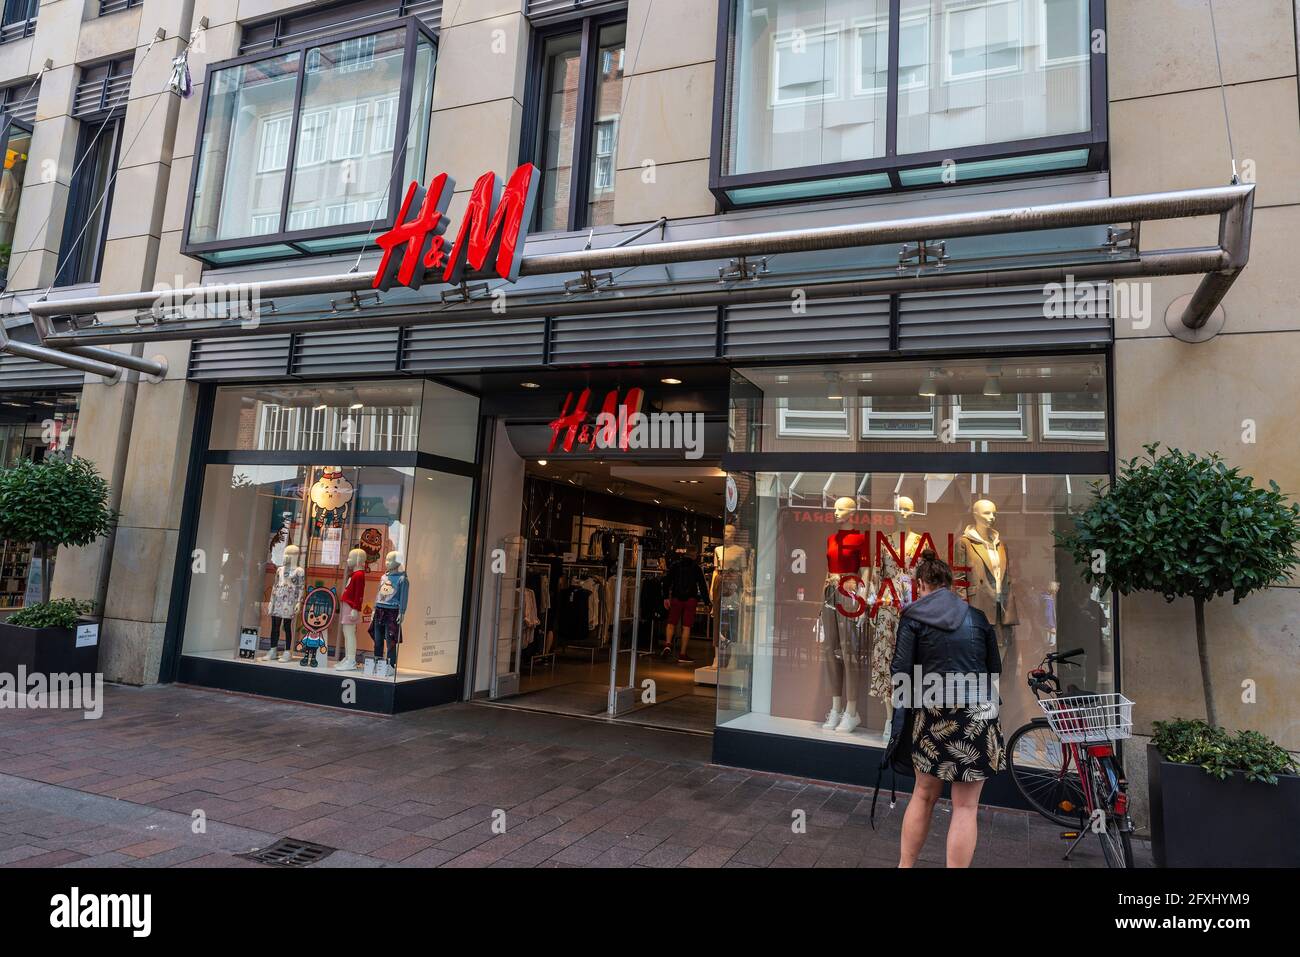 Bremen, Germany - August 19, 2019: Facade of a HM or H&M clothing store  with people around in a shopping street of Bremen, Germany Stock Photo -  Alamy